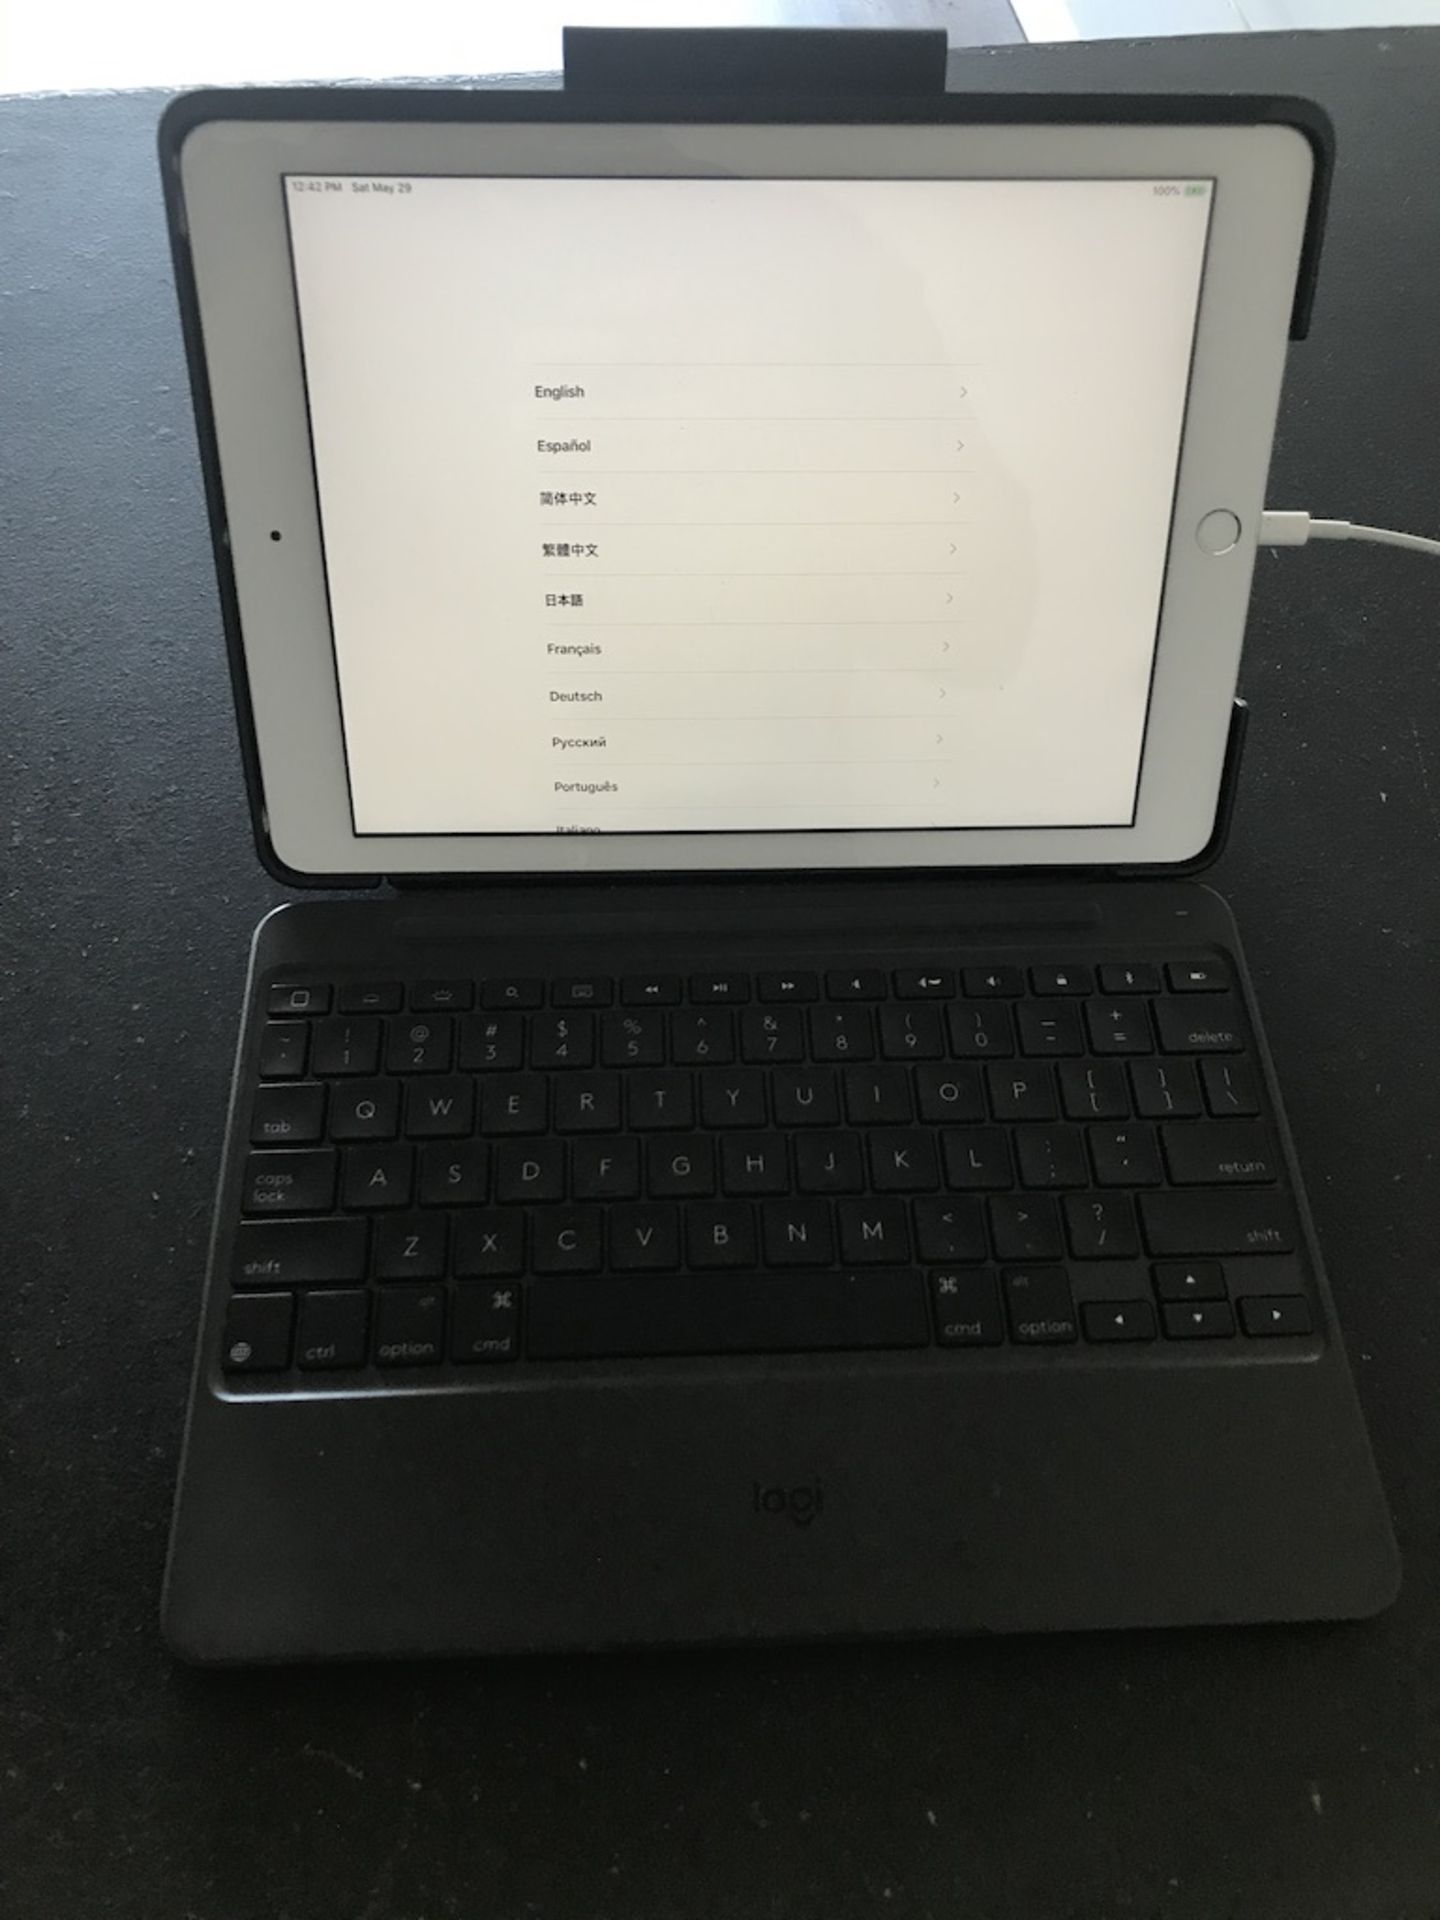 IPAD 6TH GENERATION, MODEL A1893, SERIAL GG7XJGN0JF8K, WITH LOGI KEYBOARD, AND USB CORD